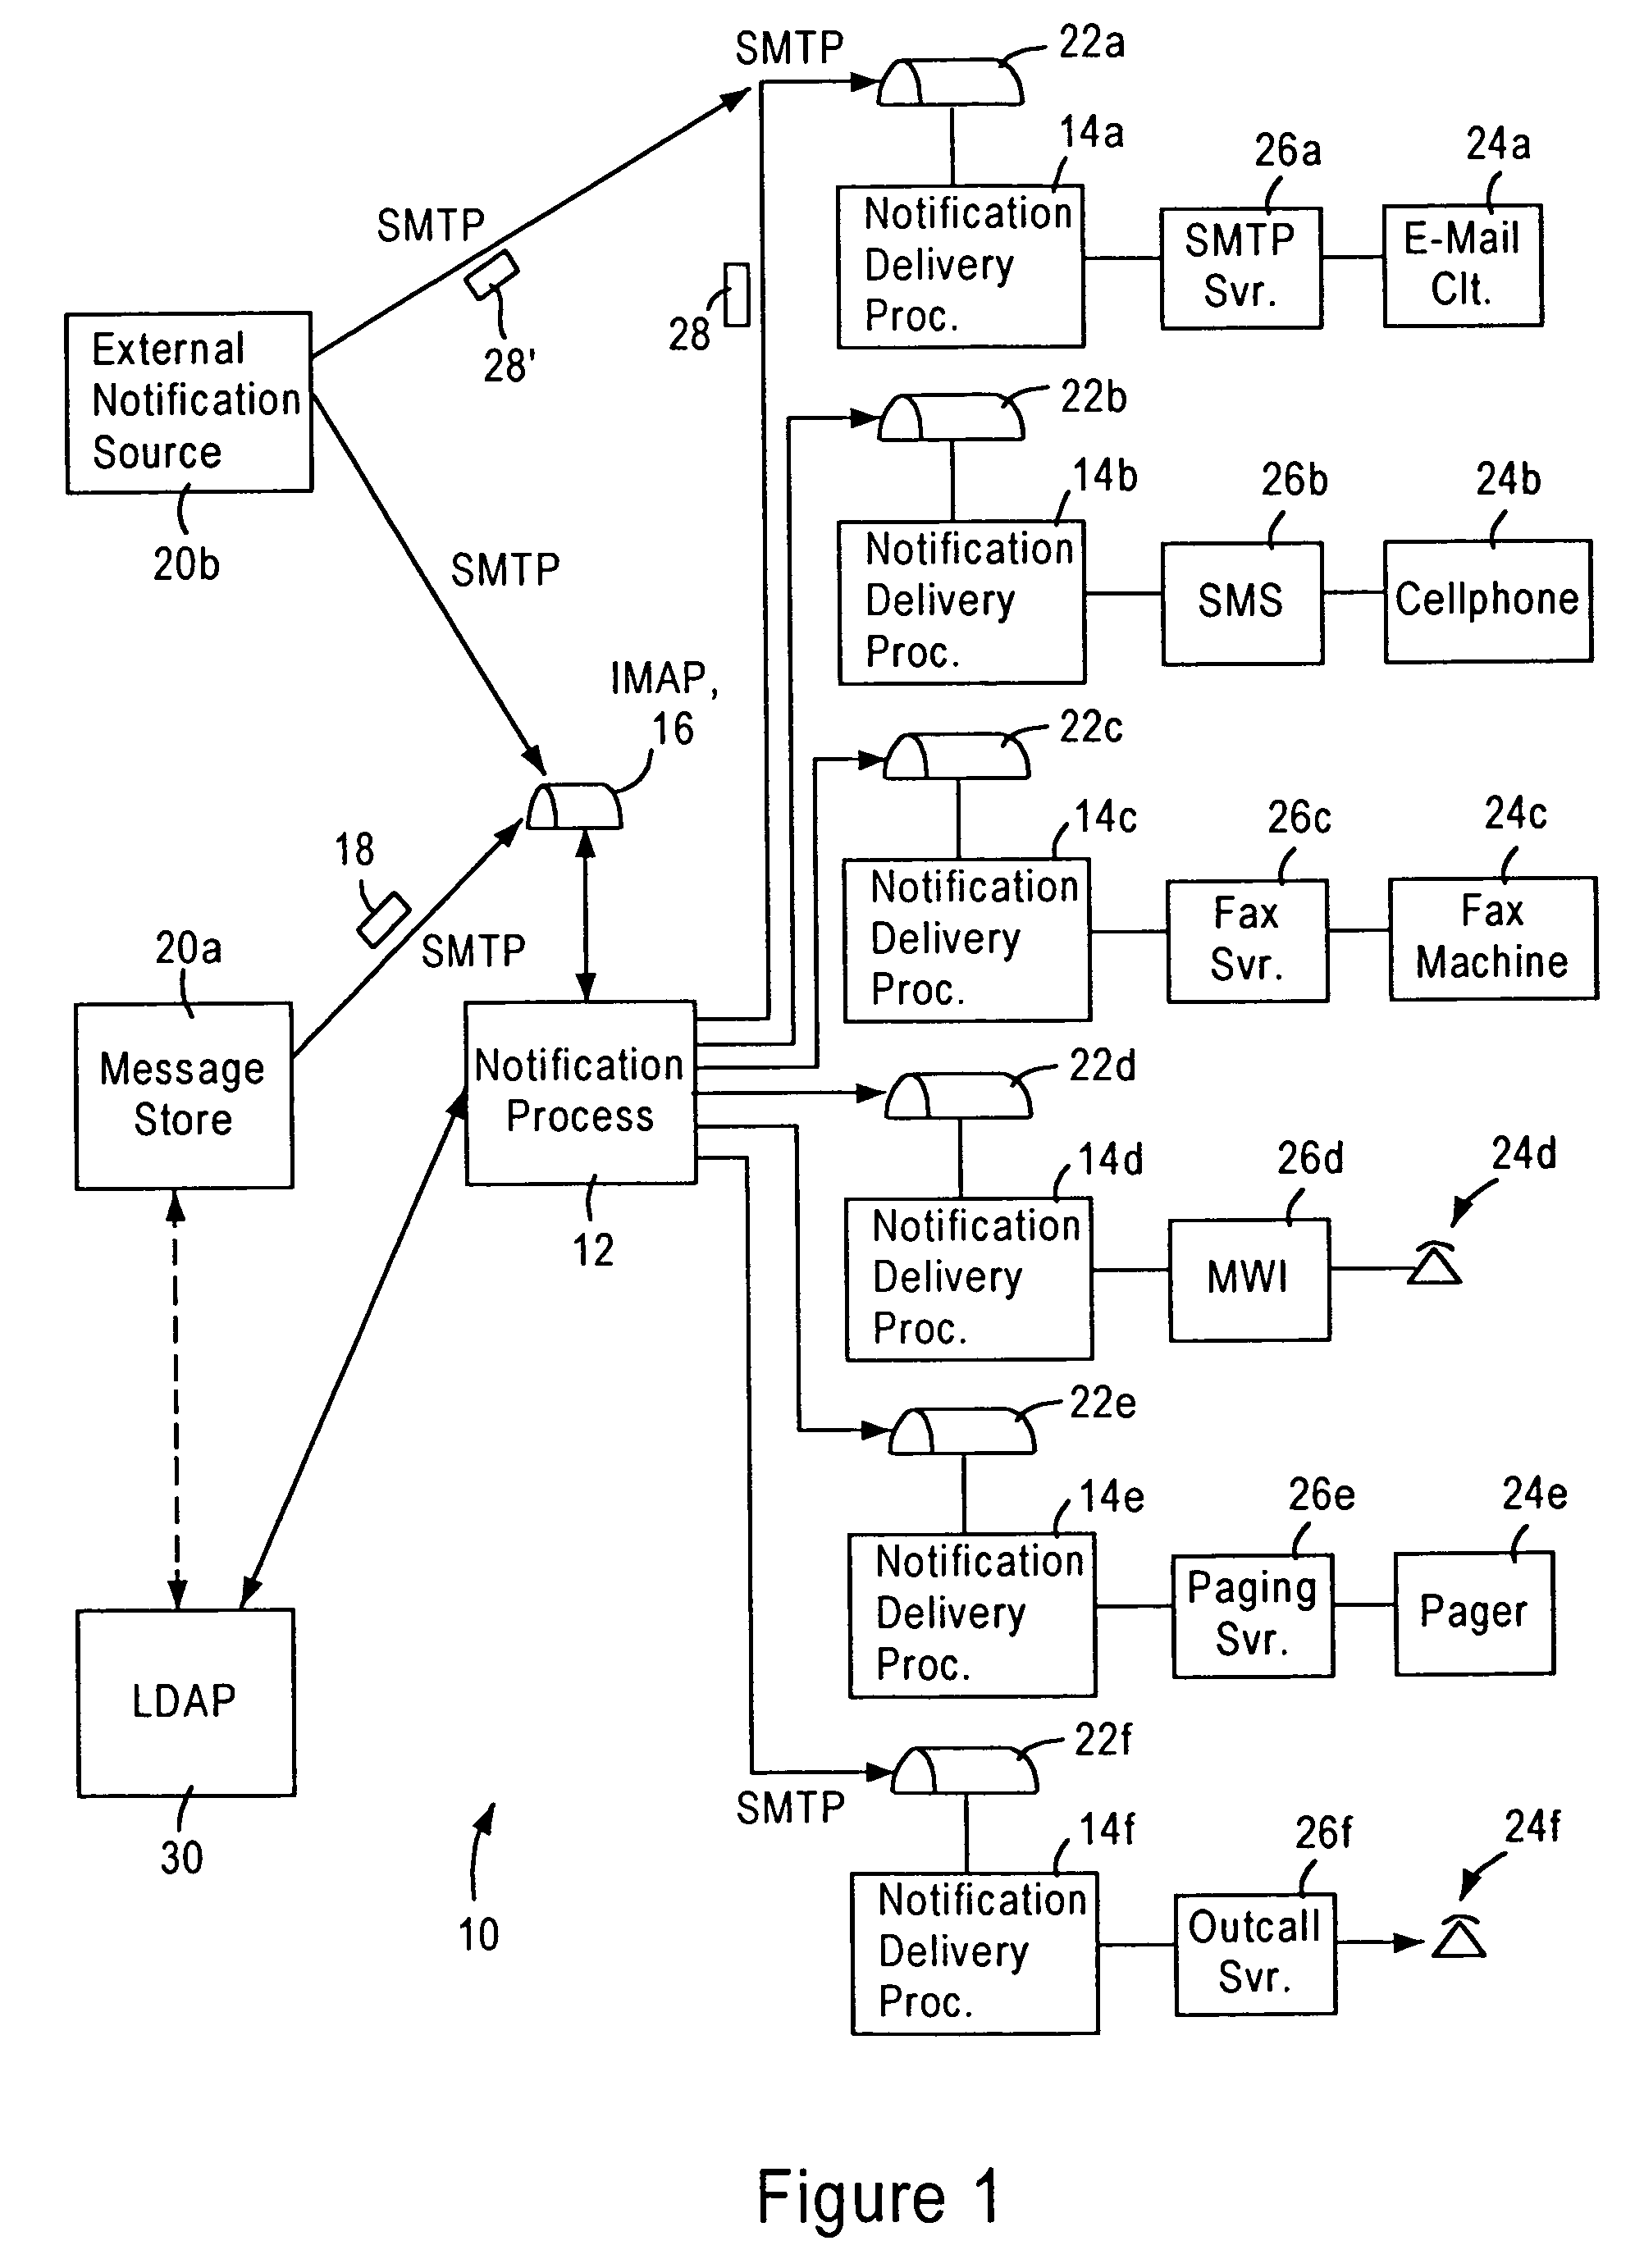 Arrangement for common-format notification delivery messages based on notification device type in an IP-based notification architecture